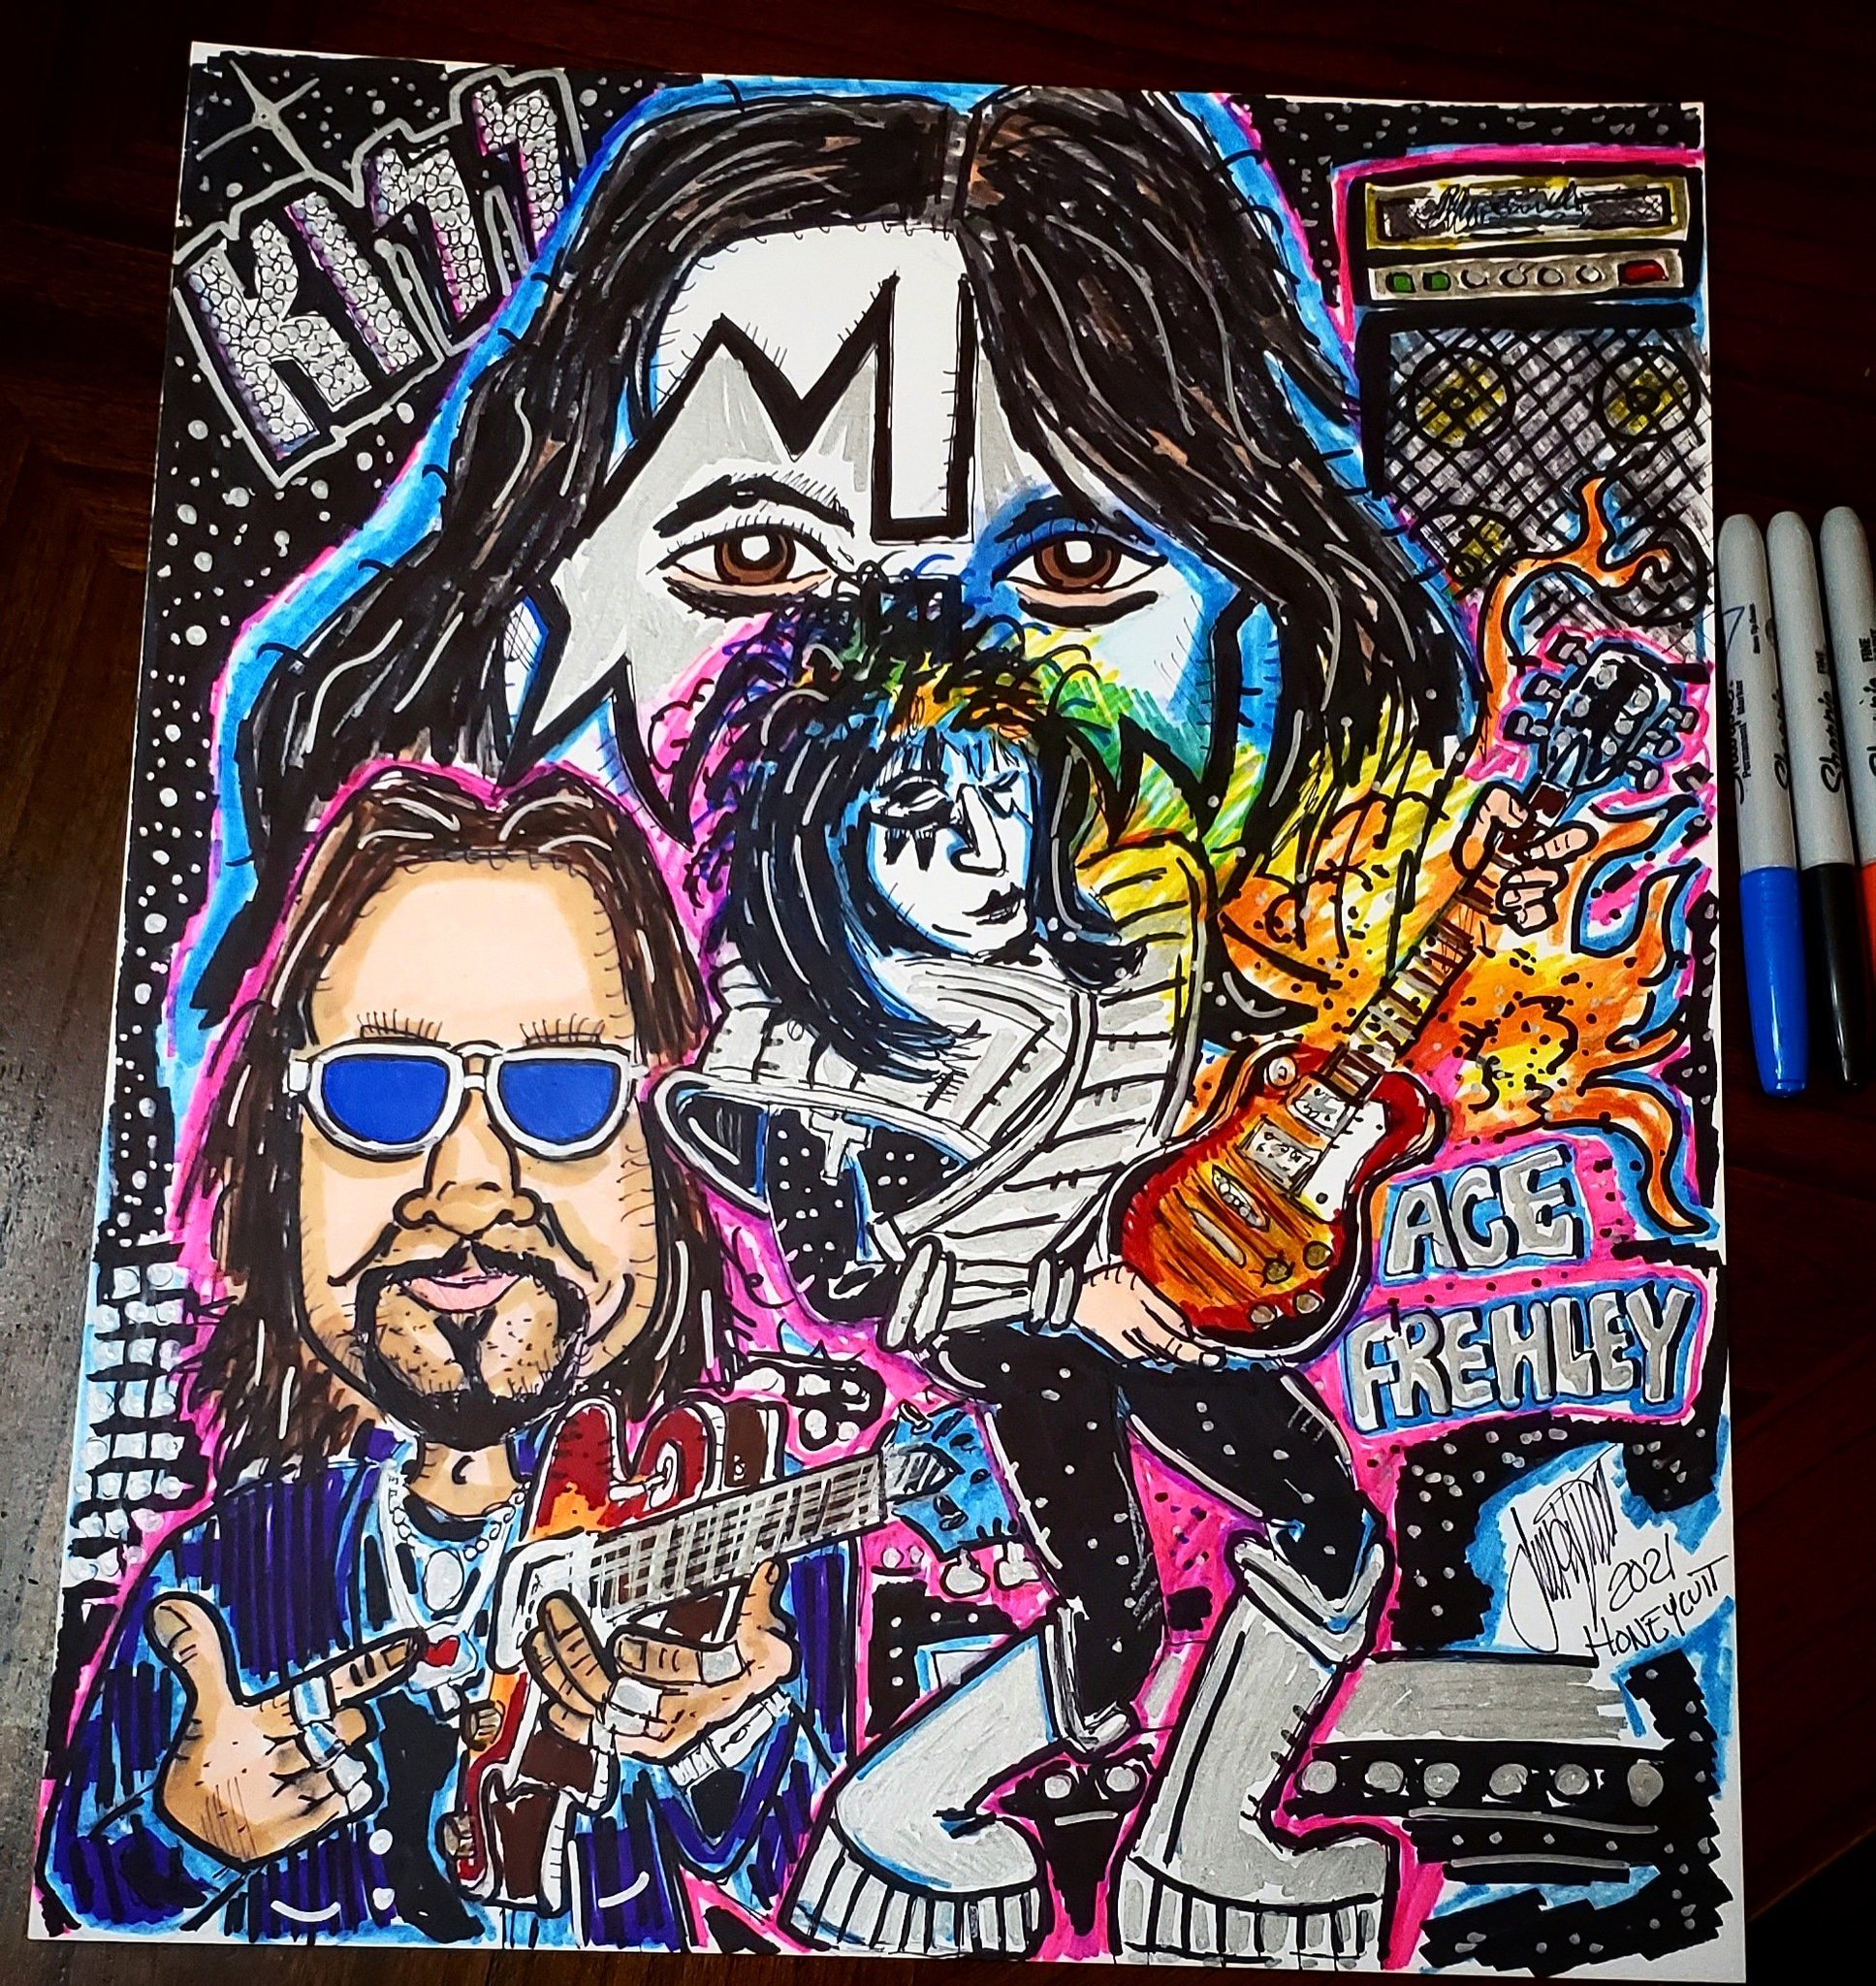  just finished this up! 
Happy Birthday man!    